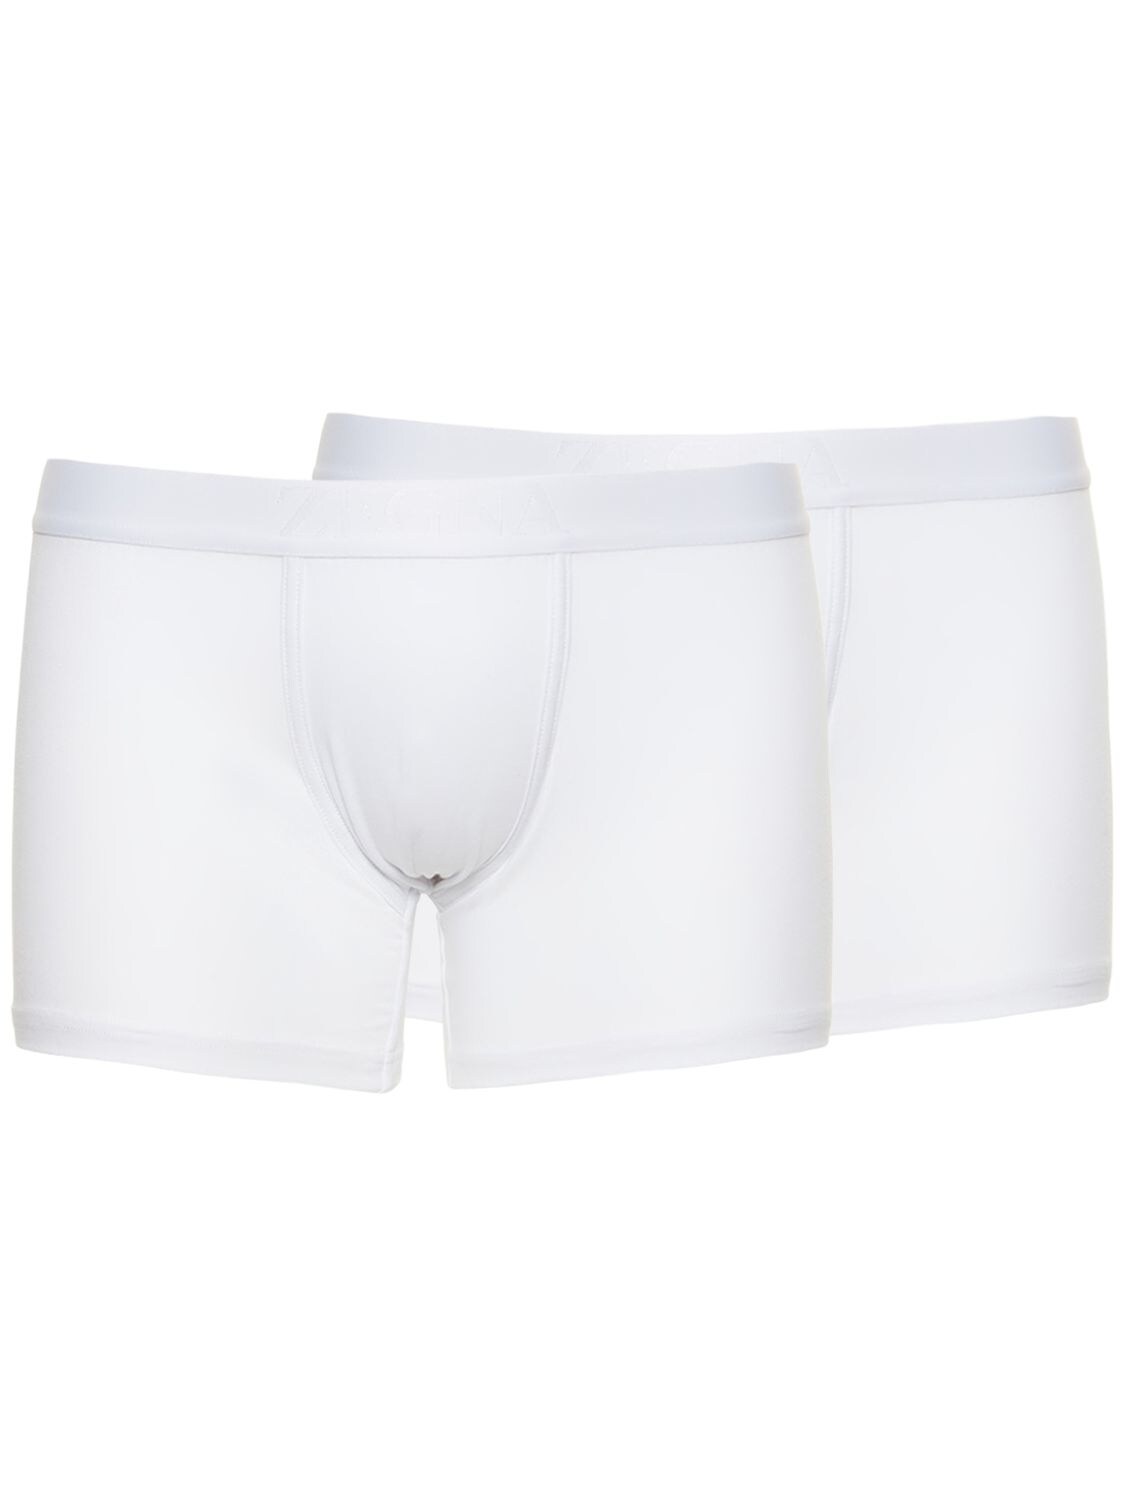 ZEGNA Pack Of 2 Logo Stretch Cotton Boxers